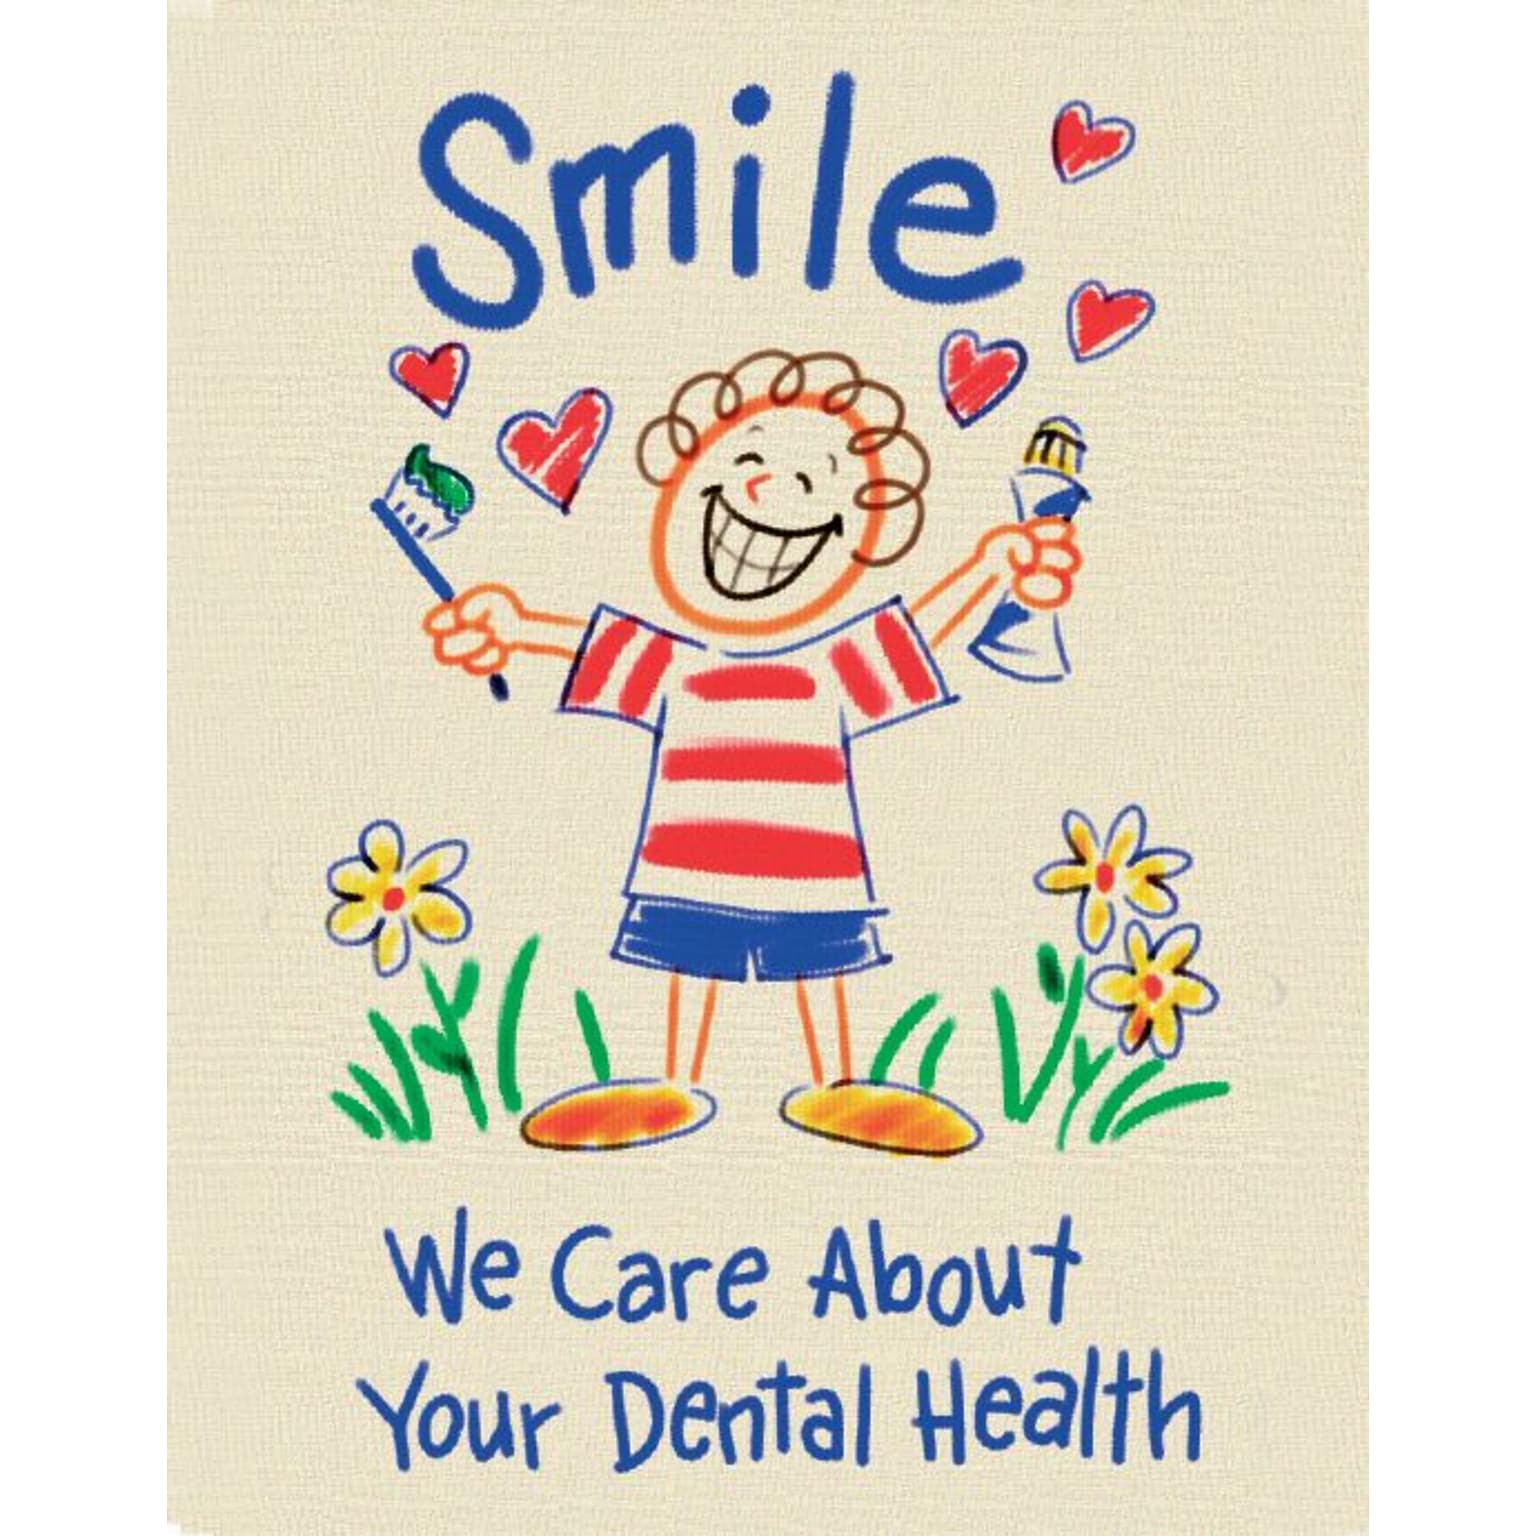 Recycled Postcards; for Laser Printer; Smile, We Care About Your Dental Health, 100/Pk